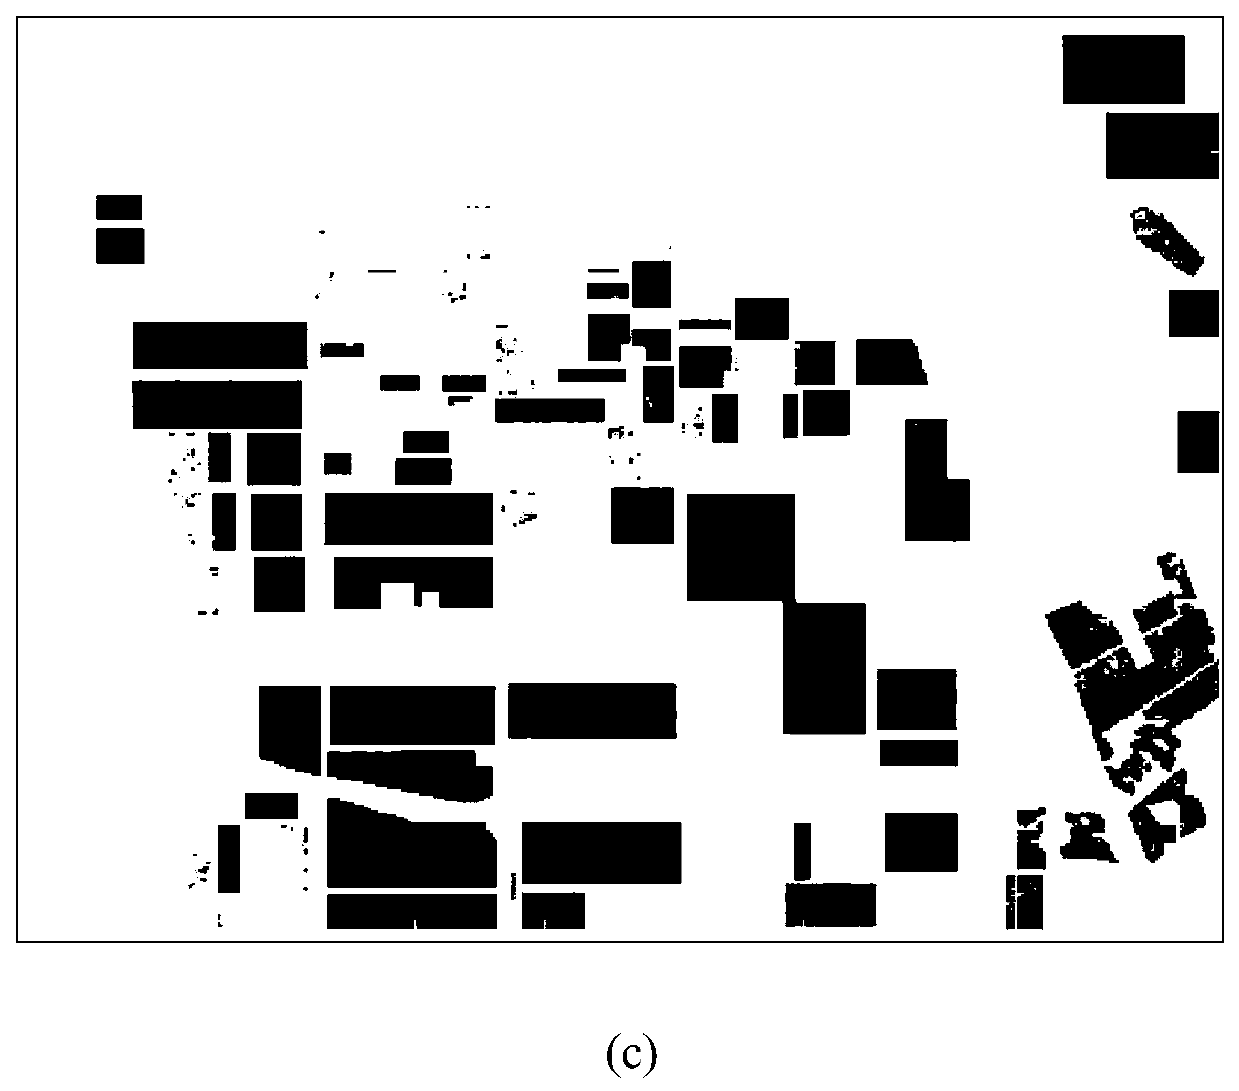 Polarization SAR Image Classification Method Based on Scattered Energy and Stack Autoencoder